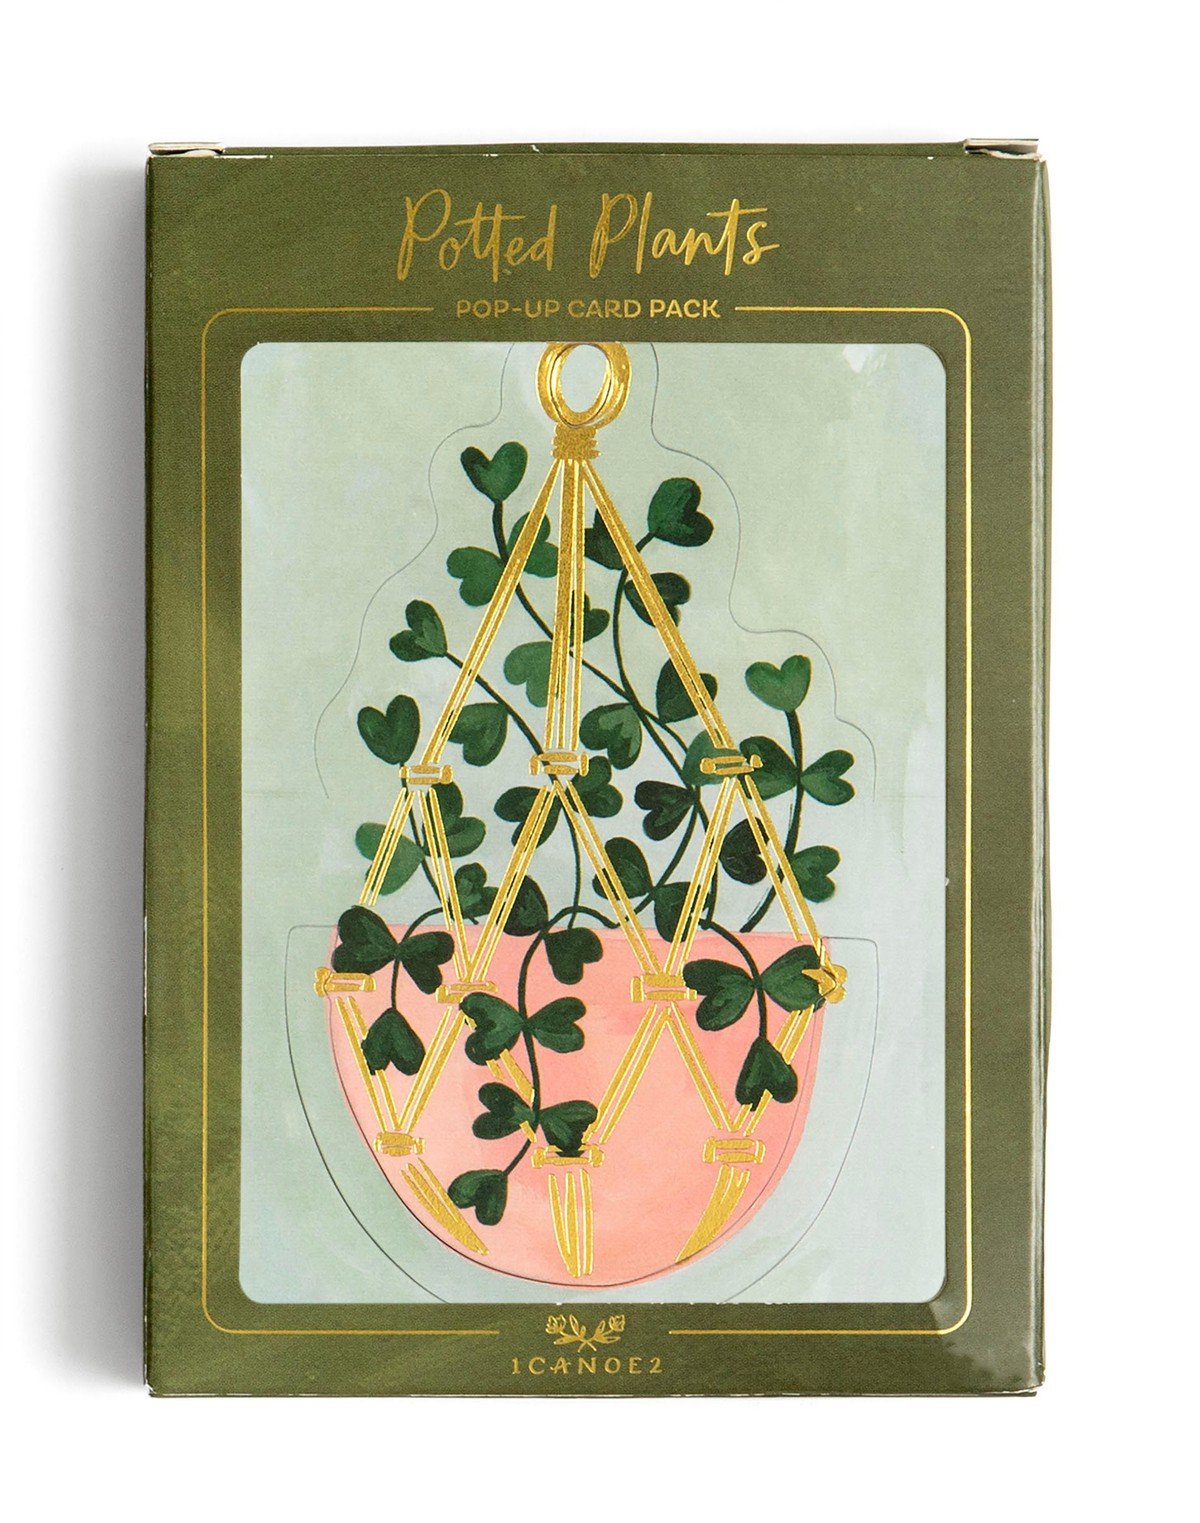 Potted Plants Pop-Up Greeting Card Box Set item